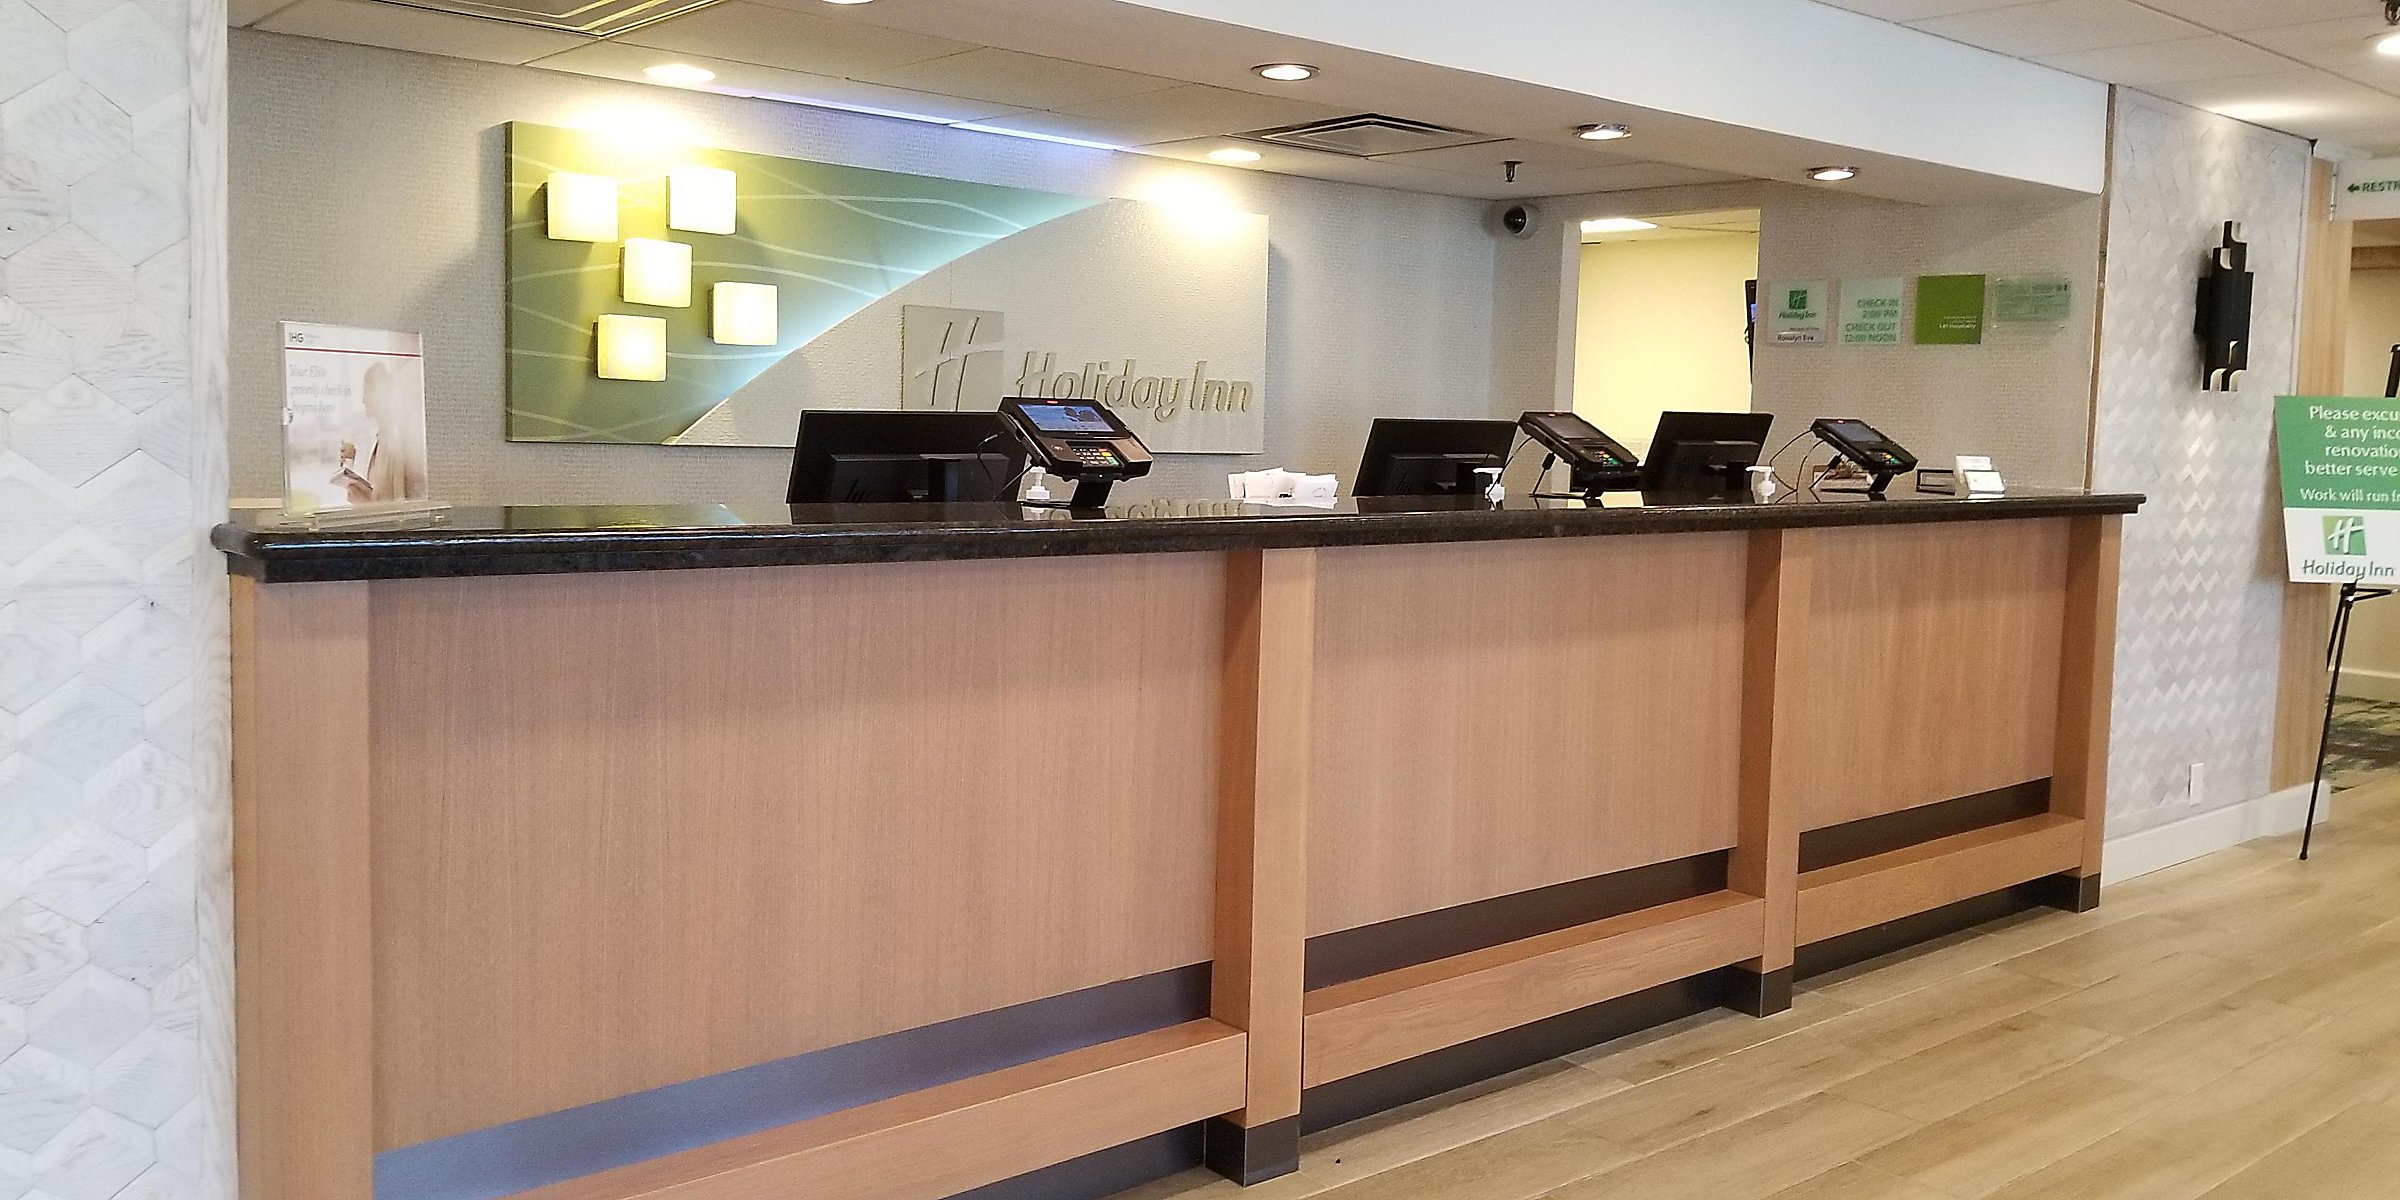 Parsippany Hotels In New Jersey Holiday Inn Suites Parsippany